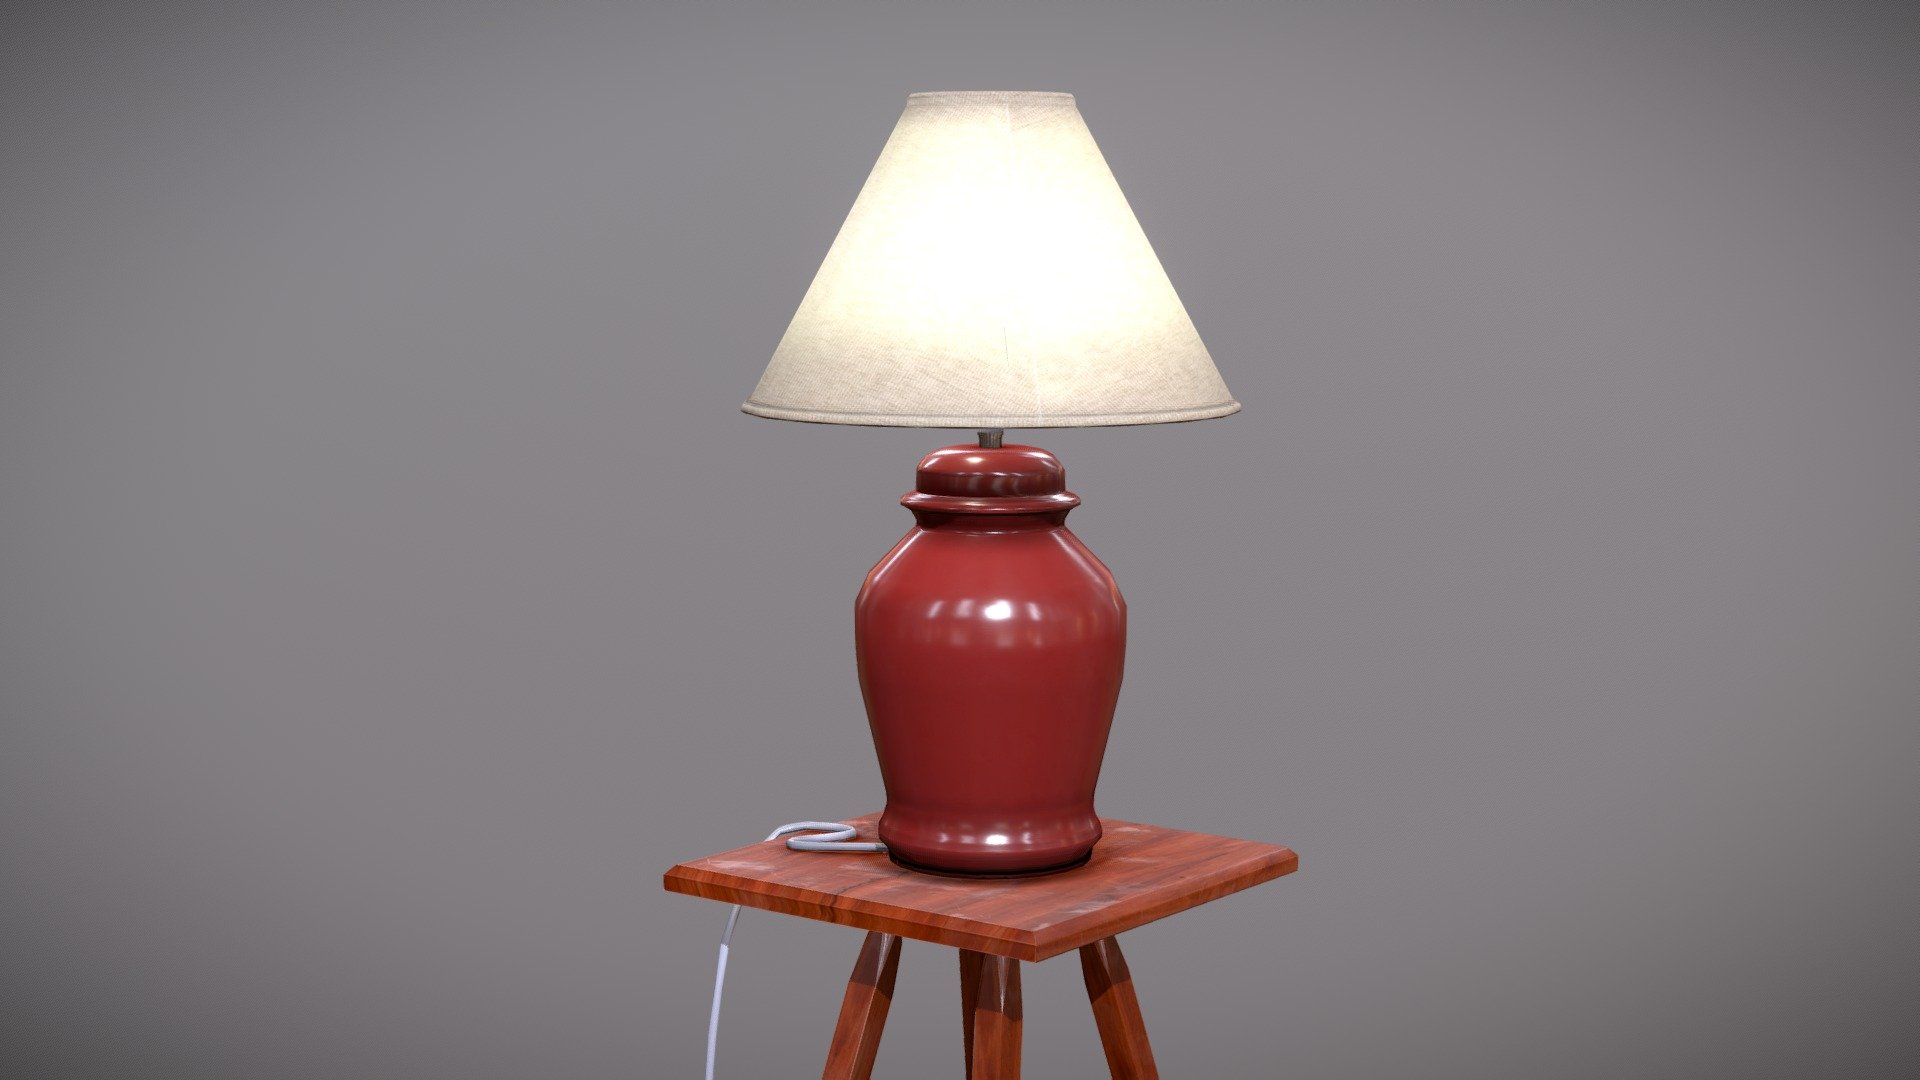 PBR low poly lamp and table, great for an office or lounge room scene in a game or architectural shot.  

File format FBX

Diffuse - 2048x2048
Normal - 2048x2048
AO - 2048x2048
Specular - 2048x2048
Gloss - 2048x2048
Emmision - 2048x2048

Both UV'd, assets share the same UV space.
Modeled in maya, baked xnormal and textured with quixel 3d model